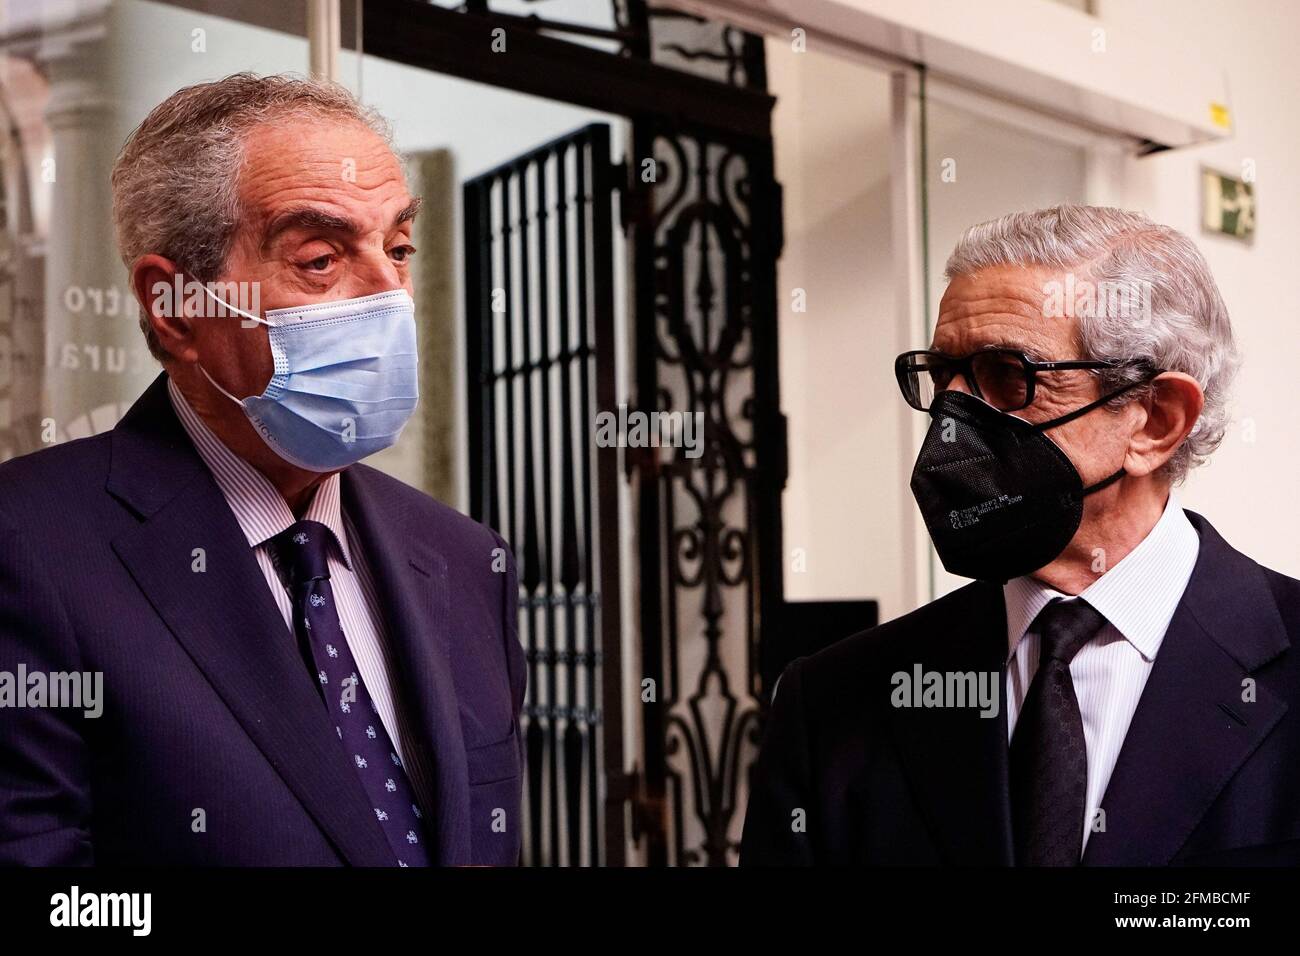 Malaga, Spain. 07th May, 2021. Former Mayor of Malaga, Luis Merino Bayona (l) and President of Fundacion Unicaja, Braulio Medel having a conversation during the exhibition at Centro Cultural Fundacion Unicaja. 'Un siglo de esplendor' is an exhibition that shows the artistic heritage of the Holy Week brotherhoods of Malaga and is one of the events organized by Agrupacion de Cofradias de Semana Santa de Malaga for the centenary of the institution. (Photo by Francis Gonzalez/SOPA Images/Sipa USA) Credit: Sipa USA/Alamy Live News Stock Photo